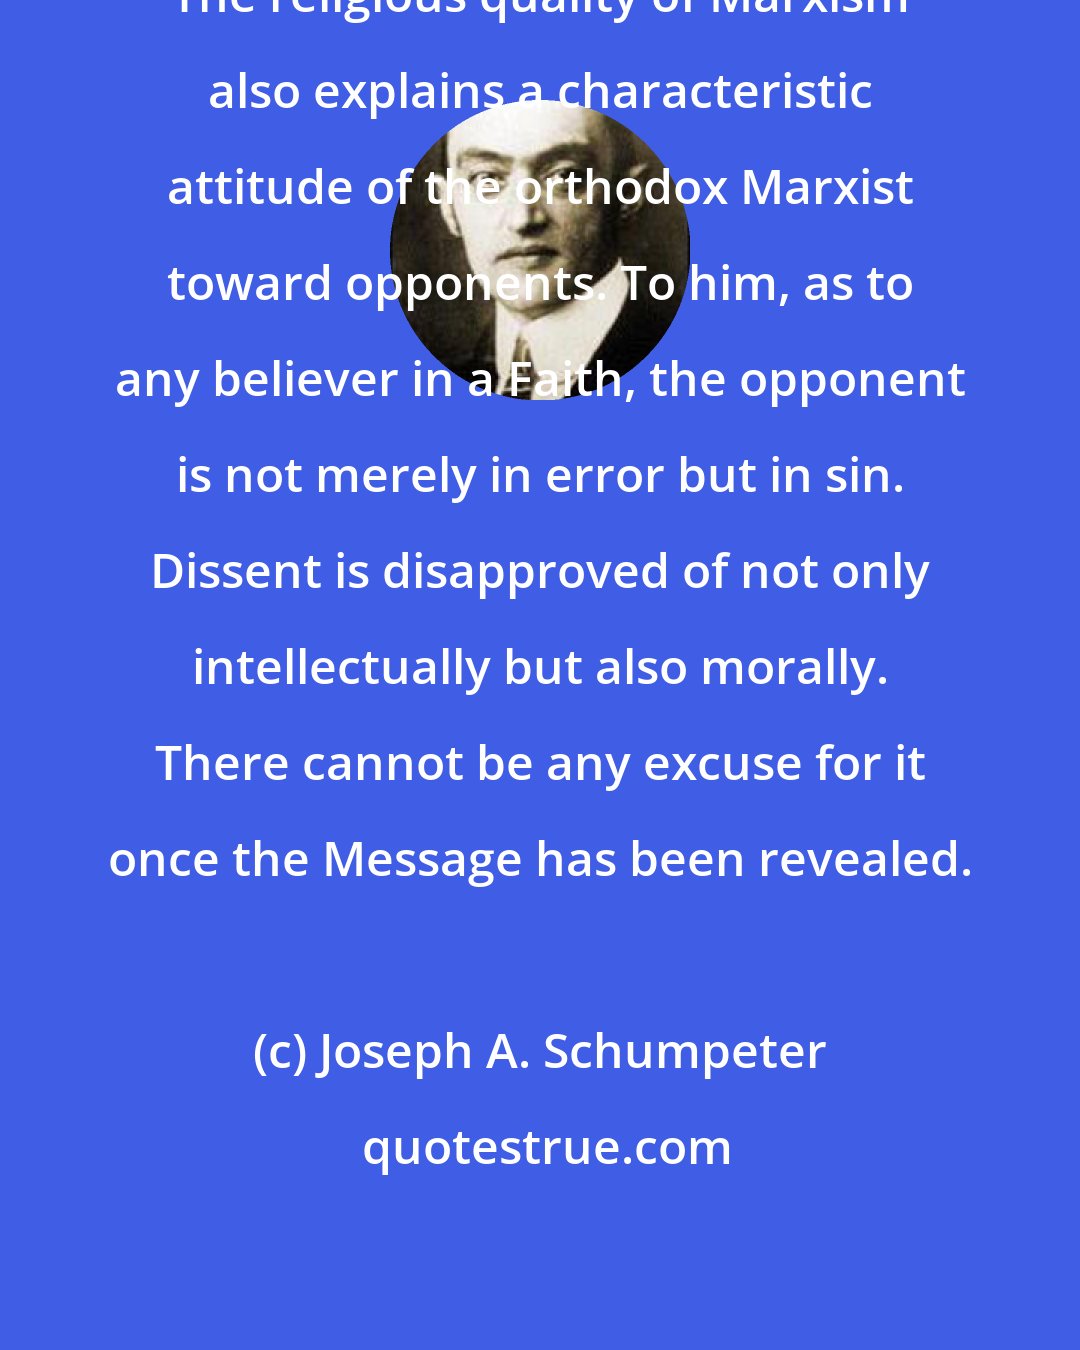 Joseph A. Schumpeter: The religious quality of Marxism also explains a characteristic attitude of the orthodox Marxist toward opponents. To him, as to any believer in a Faith, the opponent is not merely in error but in sin. Dissent is disapproved of not only intellectually but also morally. There cannot be any excuse for it once the Message has been revealed.